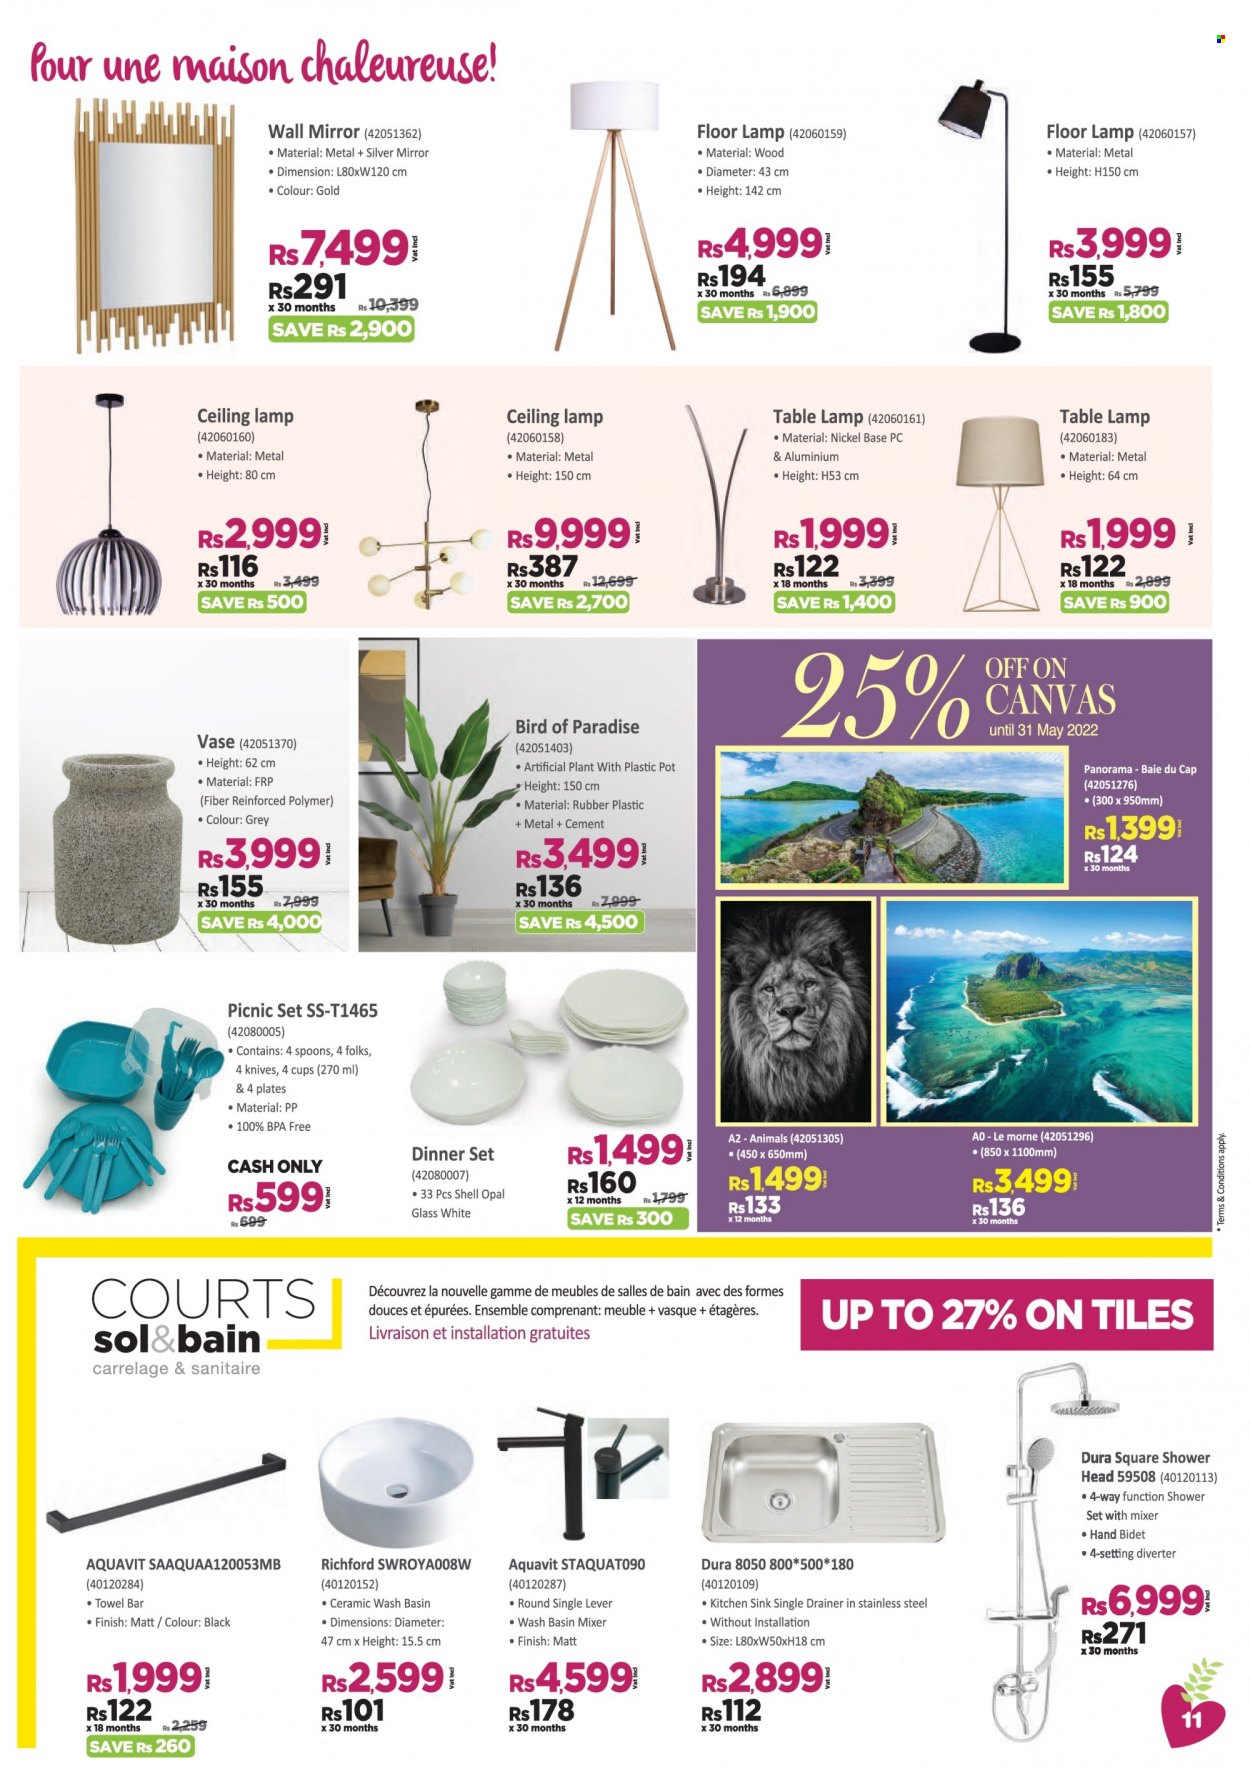 Courts Mammouth Catalogue - 1.05.2022 - 19.05.2022 - Sales products - dinnerware set, knife, spoon, plate, pot, cup, mirror, vase, artificial plants, showerhead, basin mixer, sink, lamp, table lamp, ceiling lamp, floor lamp, plant. Page 11.